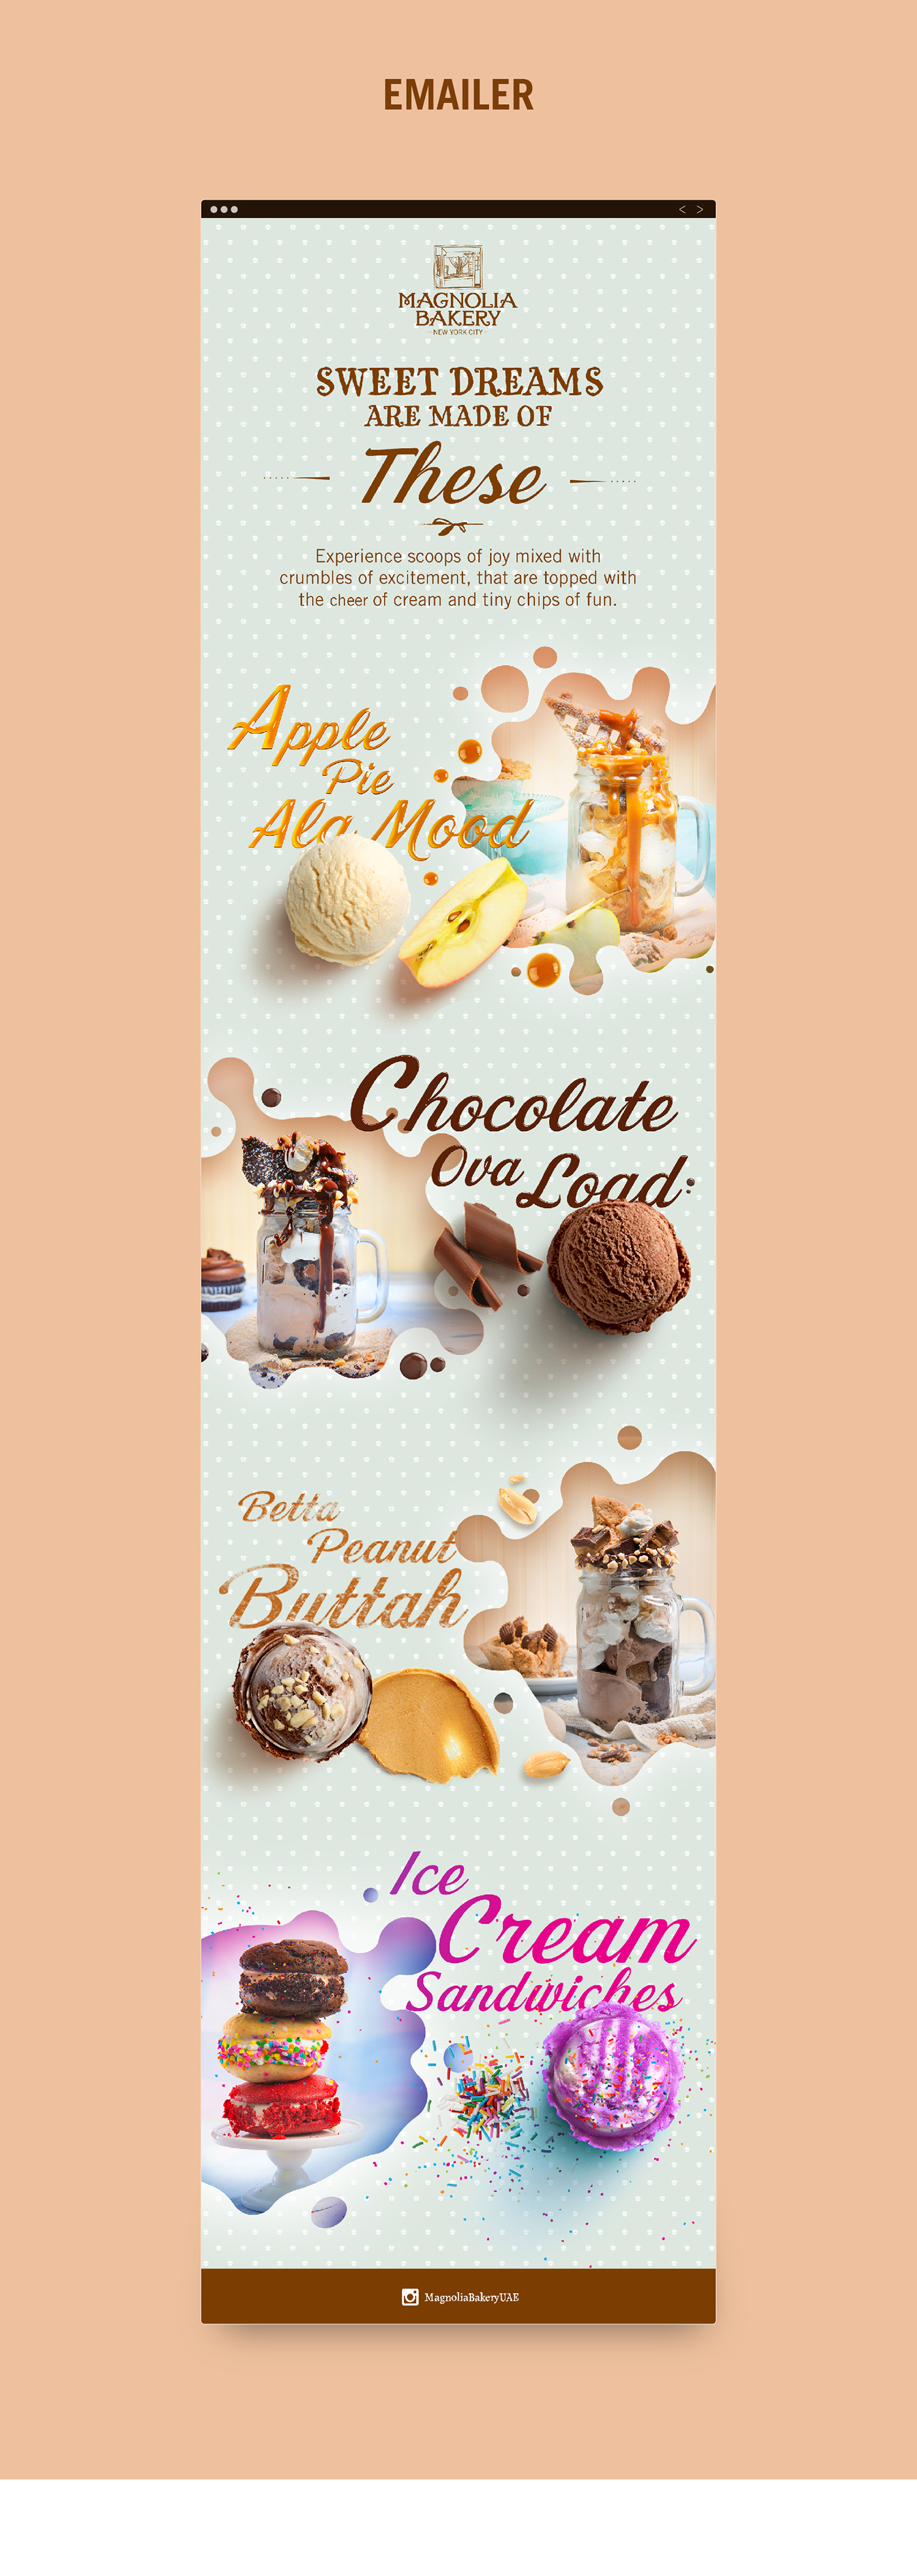 ice cream table top menu menu loaded desserts . emailer . Email Bakery Store . Cone . wafer cone . Ice Cream Scoop